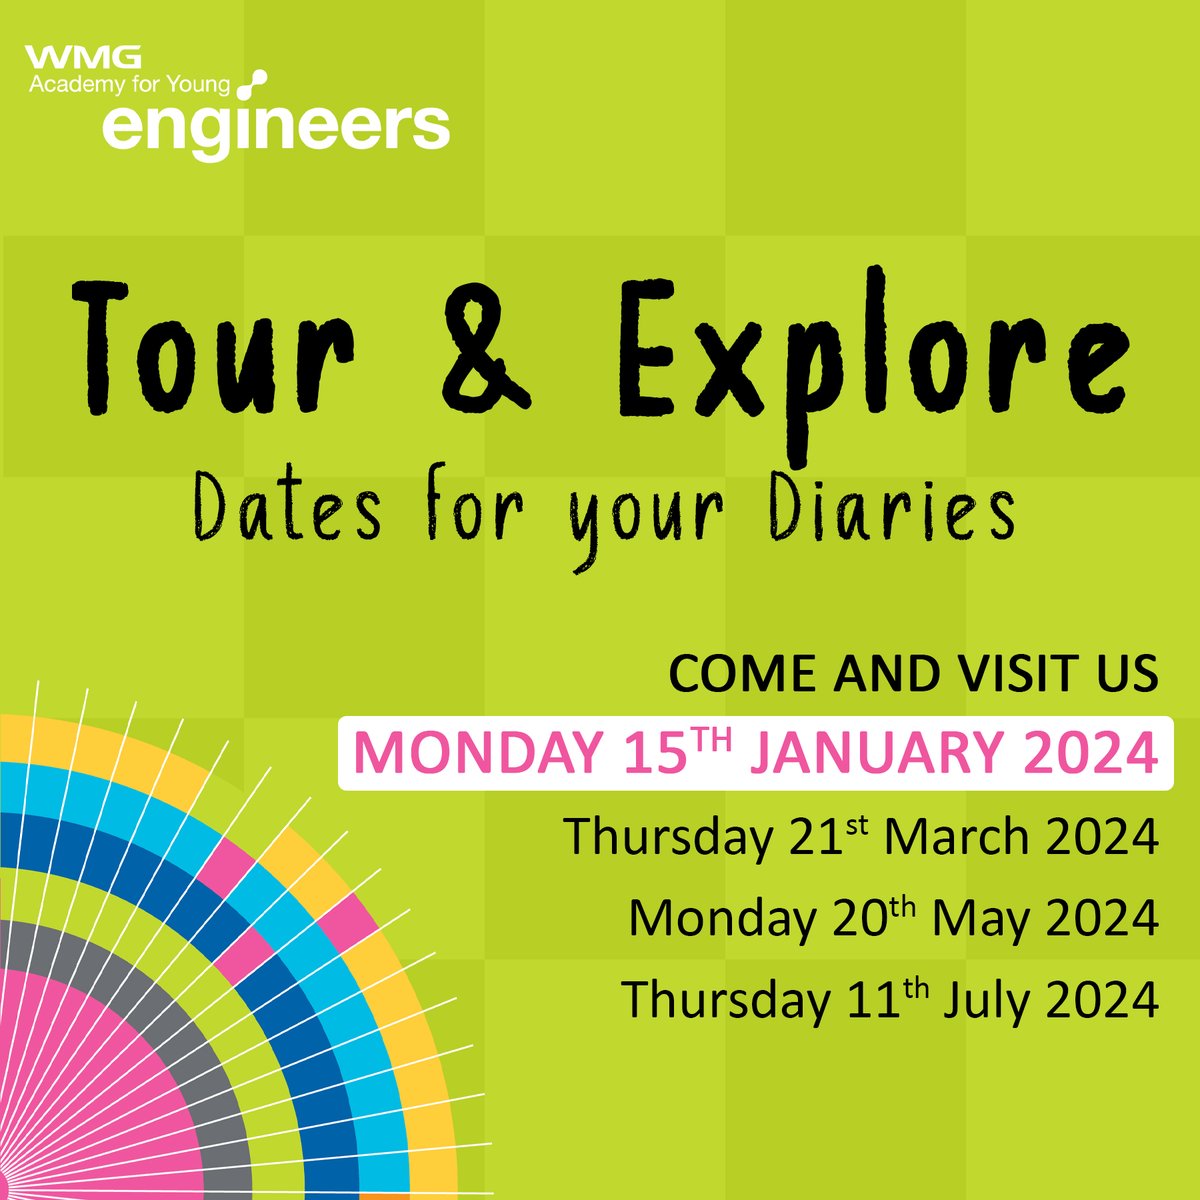 Come and tour with us at WMG Academy. Look around and ask any questions in person before the application deadline. 
Register here: rb.gy/lvww8b or email us at solihull.info@wmgacademy.org.uk
#TourAndExplore #ApplicationDeadline #WMGAcademySolihull #WMGAcademy